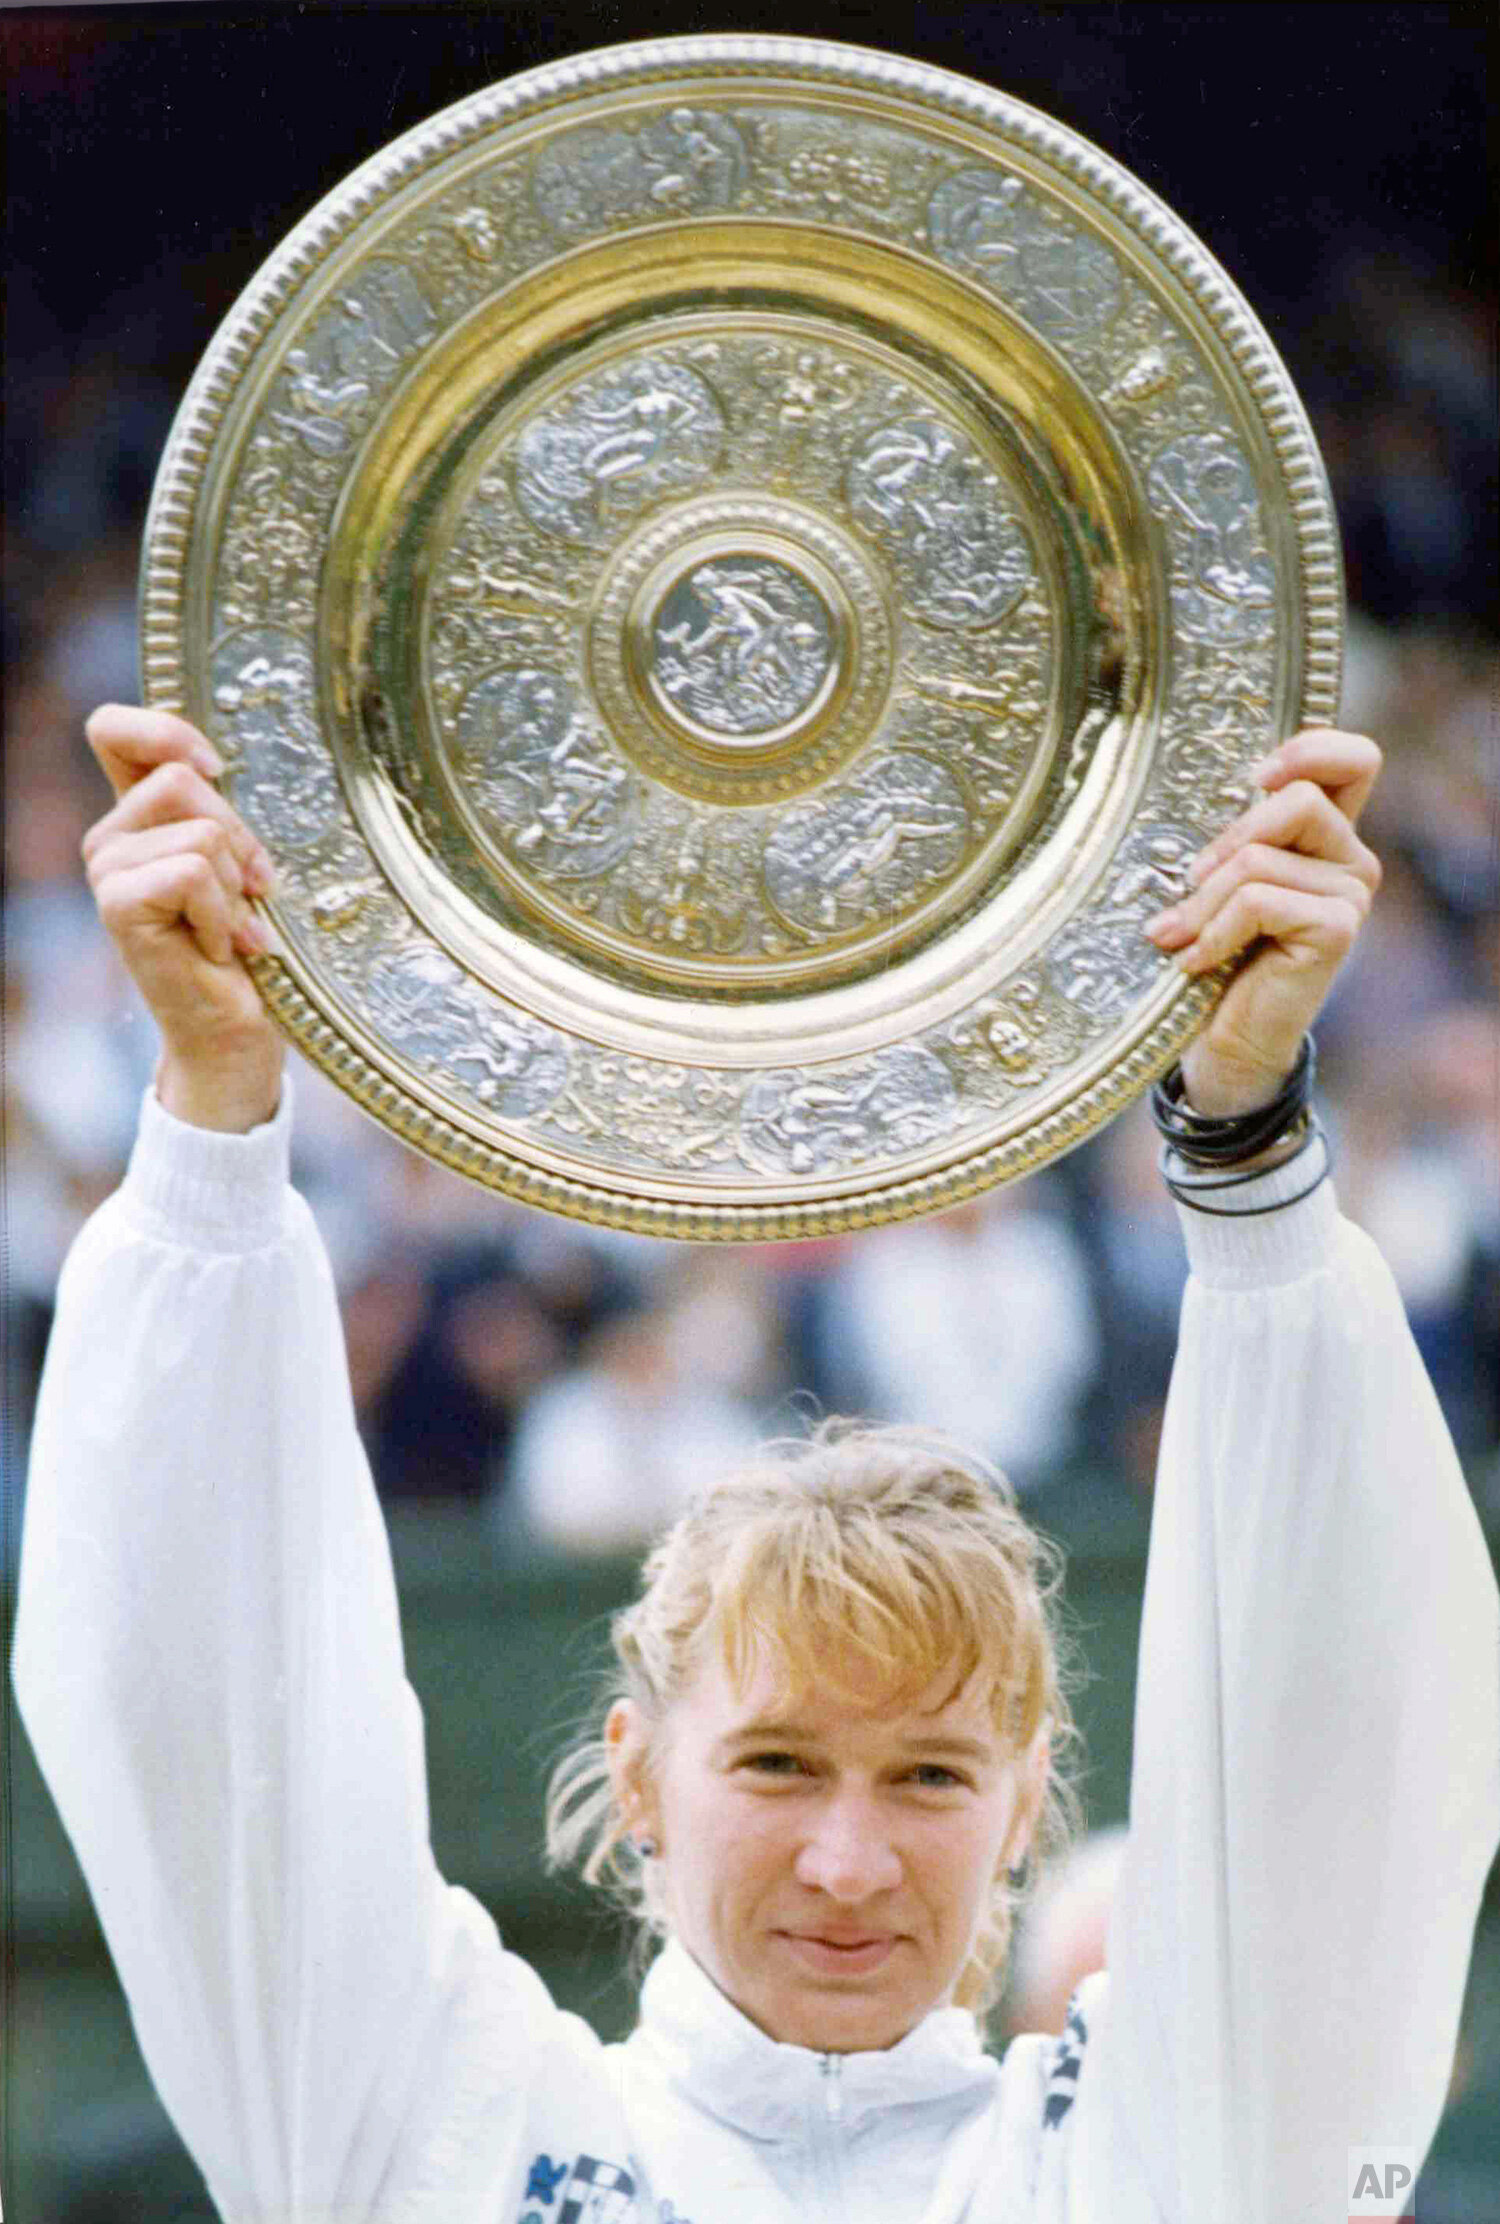  West Germany's Steffi Graf holds up the Championship Plate on the Centre Court at Wimbledon, London, July 9, 1989, after defeating Martina Navratilova for the second year in succession. (AP Photo/Dave Caulkin) 